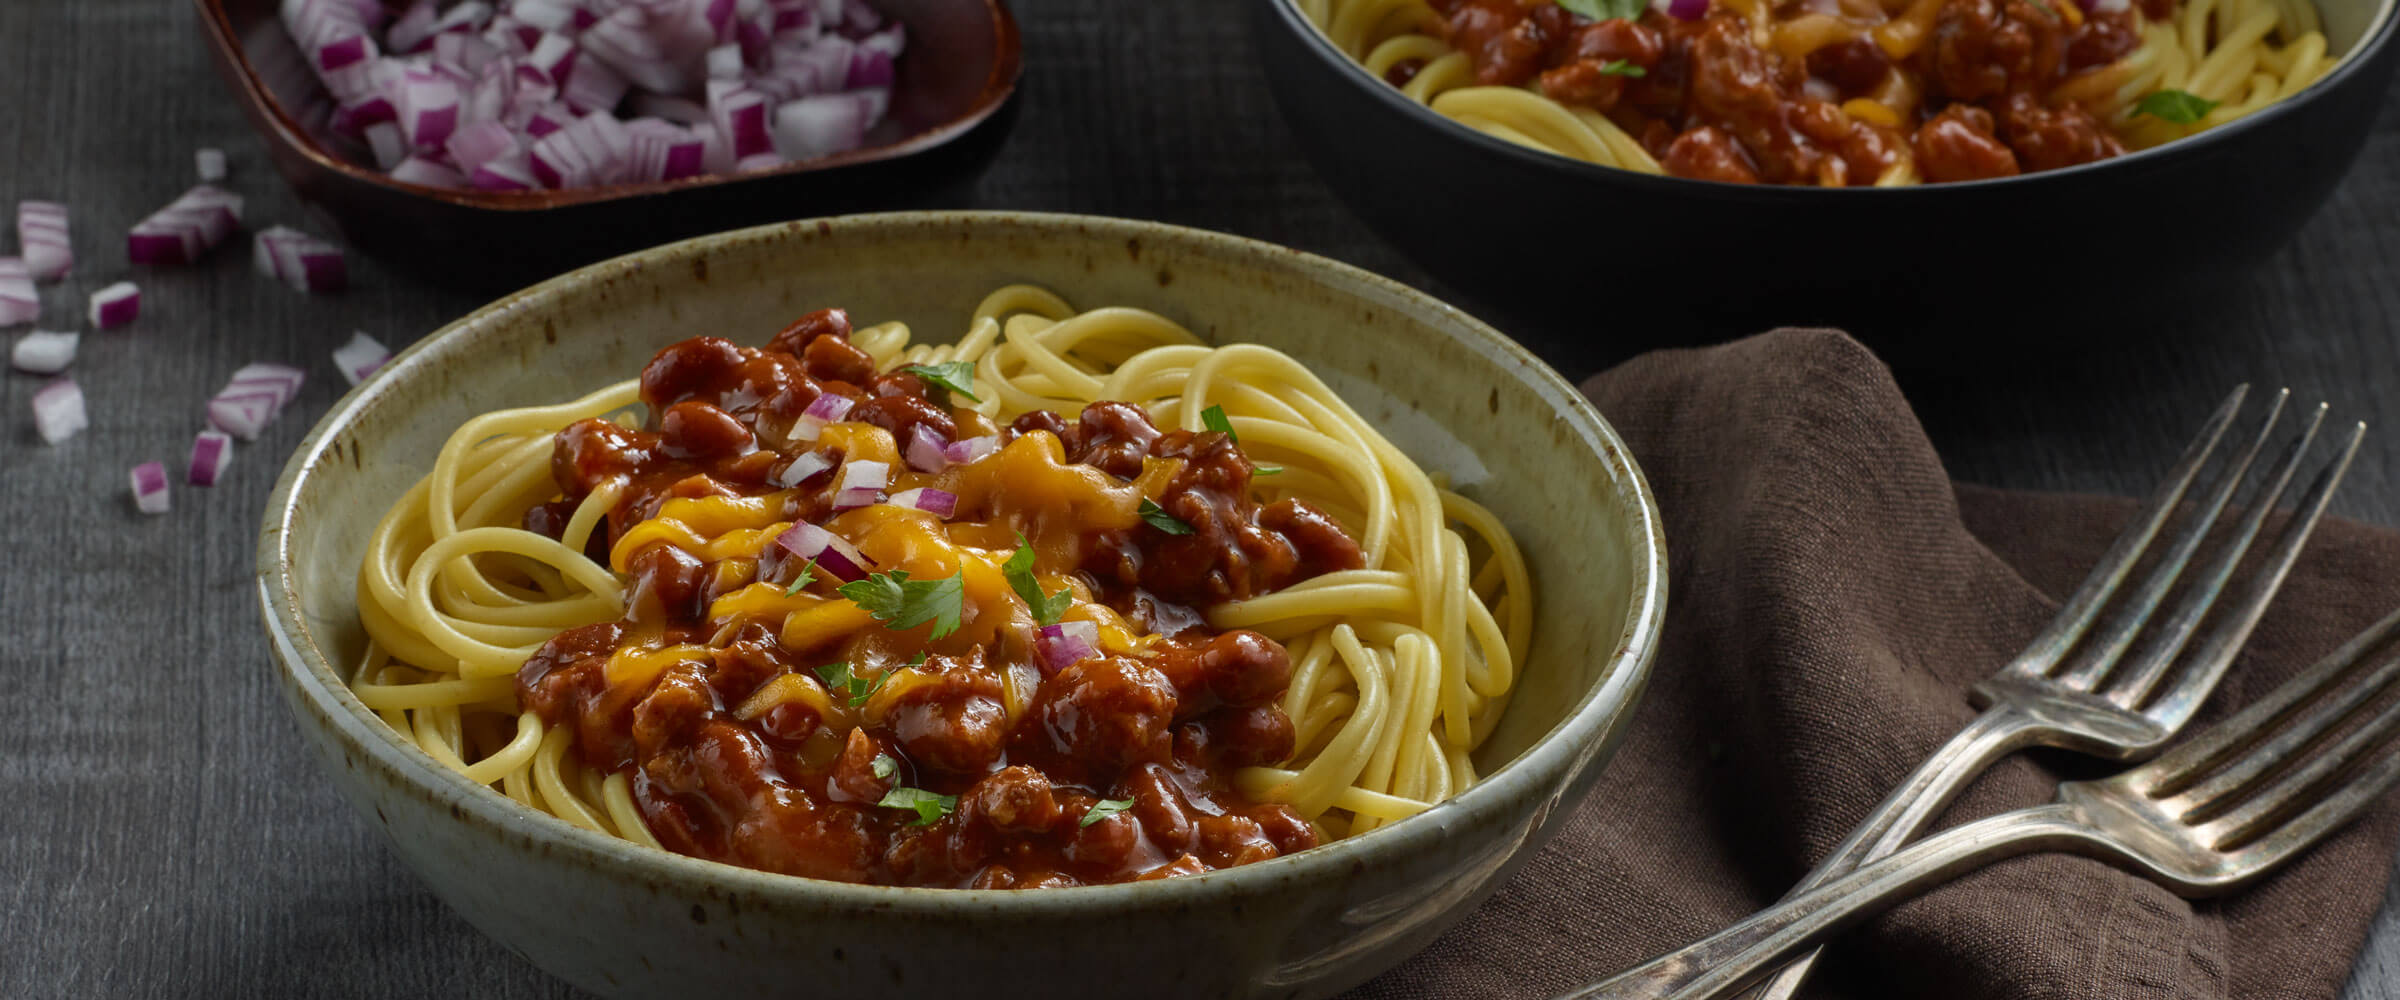 Cincinnati-Style Chili Spaghetti topped with cheese and red onions in dish with forks